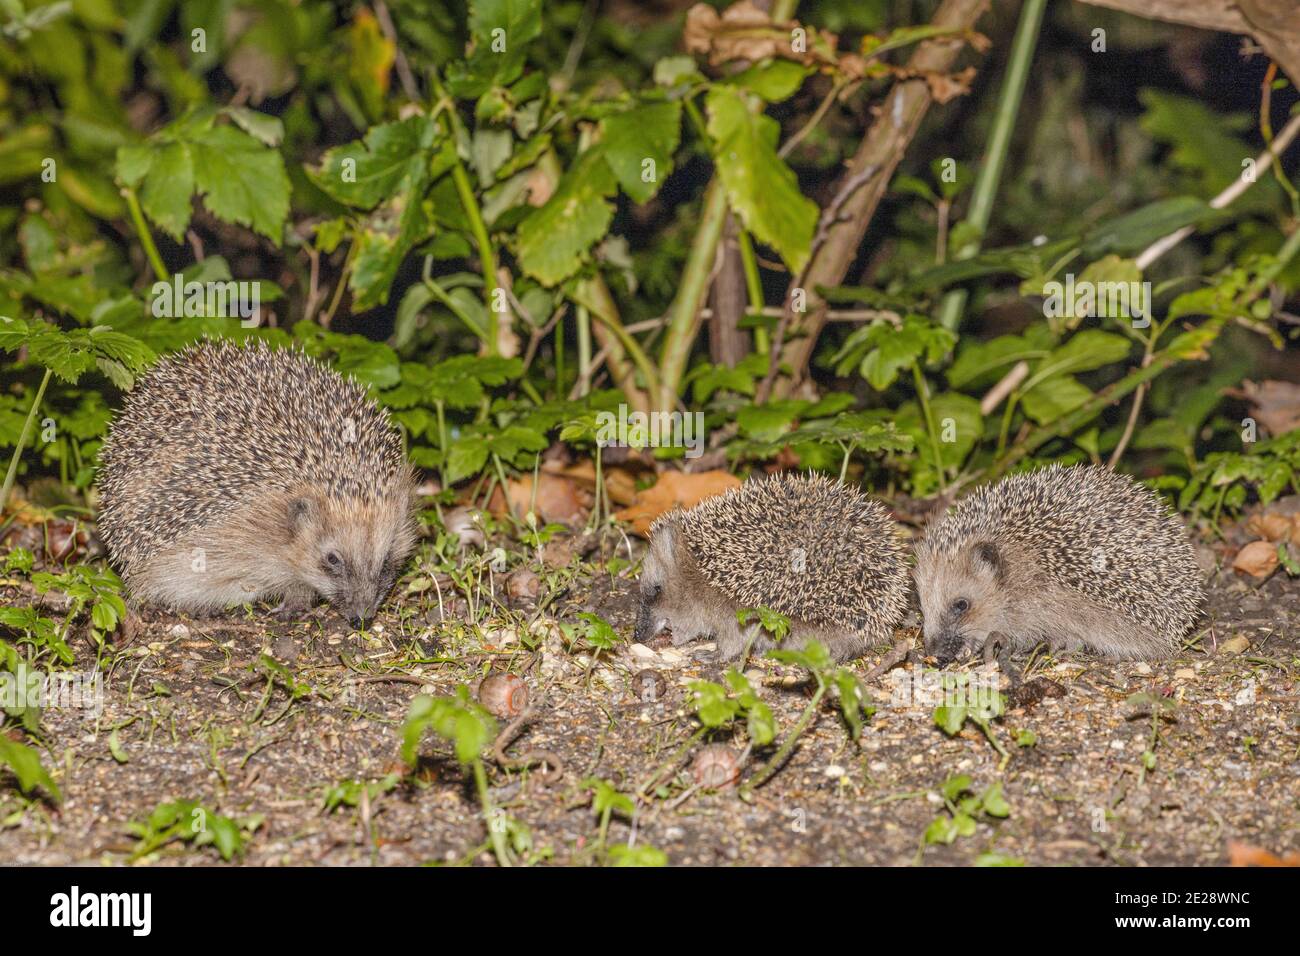 Western hedgehog, European hedgehog (Erinaceus europaeus), female eating with her young animals at a birds feeding place in late autumn, Germany, Stock Photo